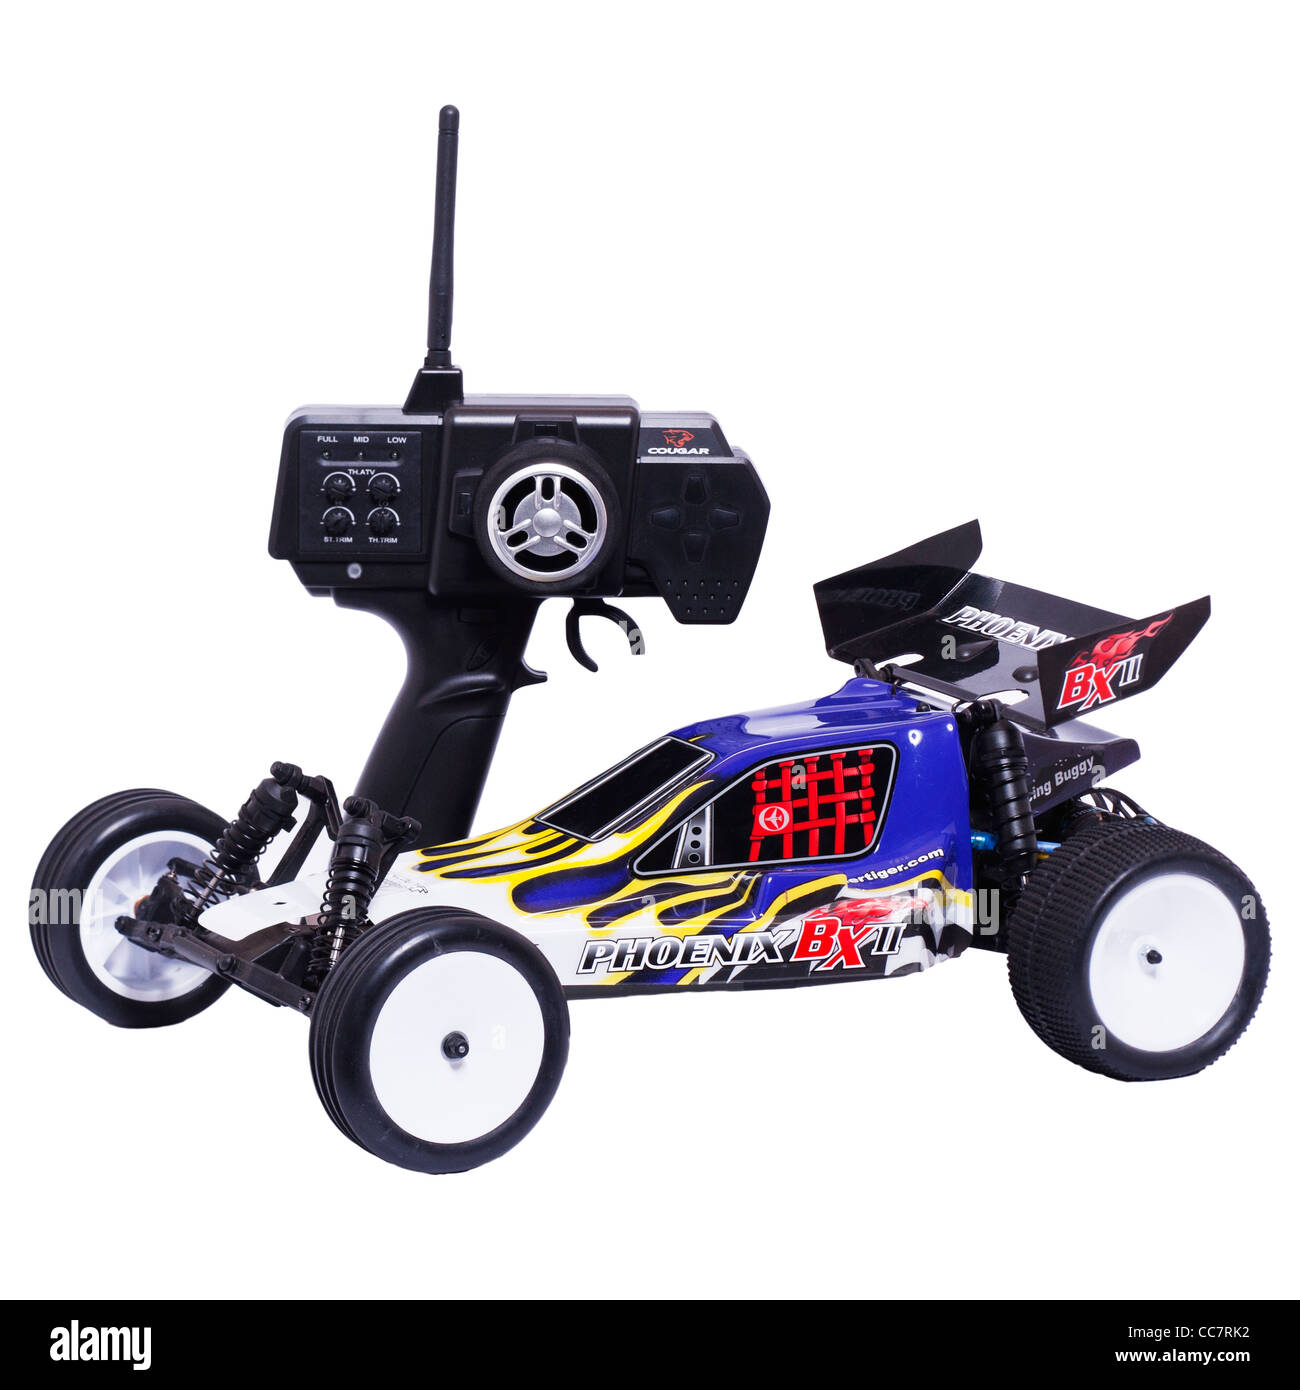 A radio controlled Phoenix BX off road buggy car on a white background Stock Photo